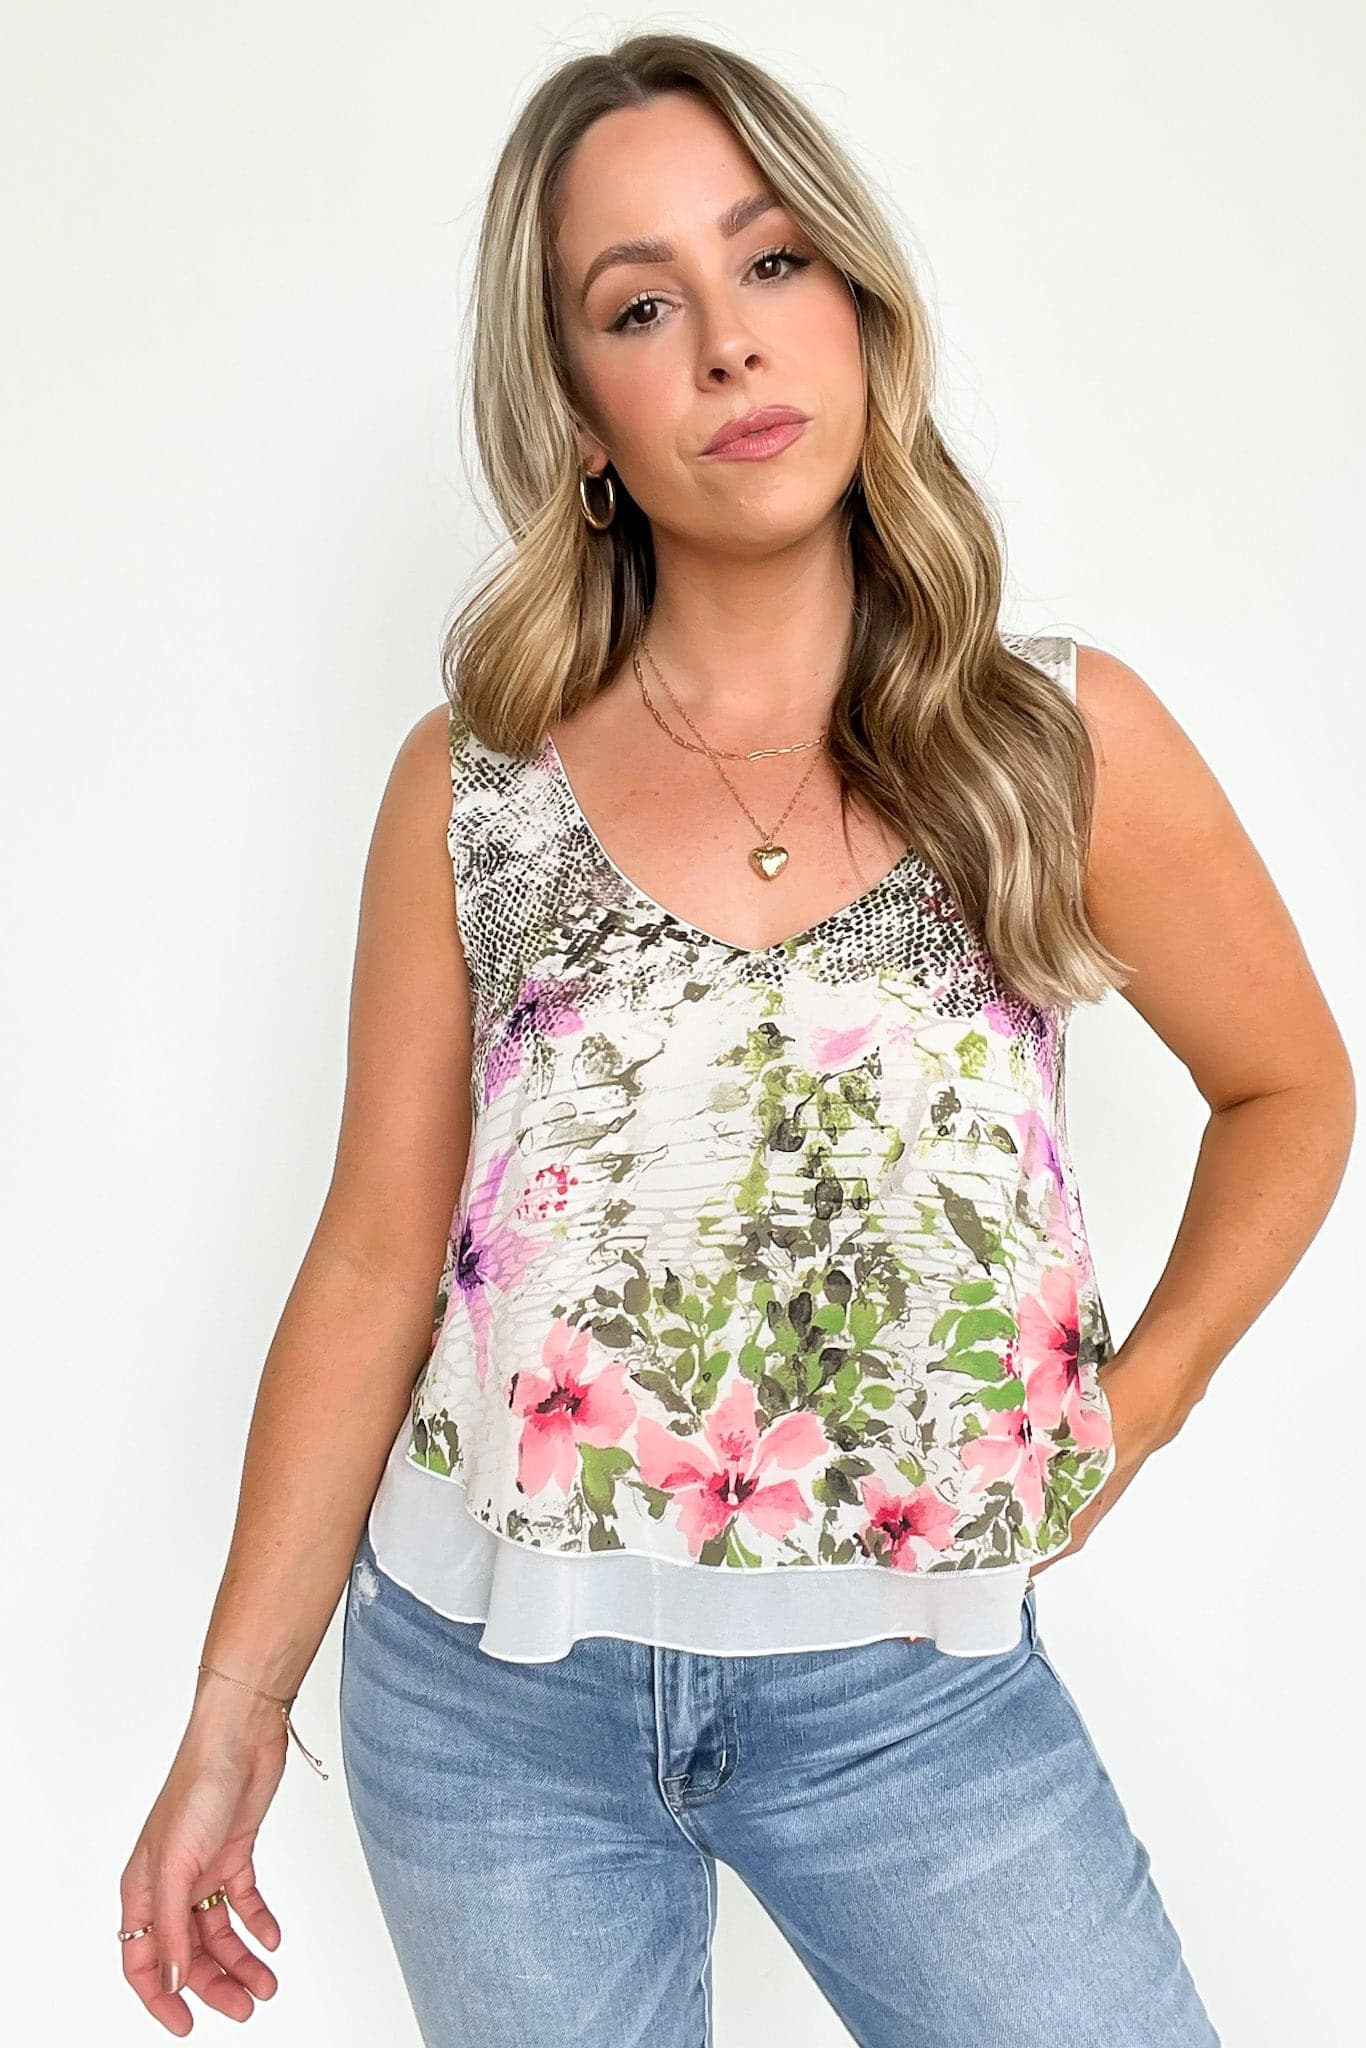  Lovely Entrance Flounce Floral Print Top - FINAL SALE - Madison and Mallory